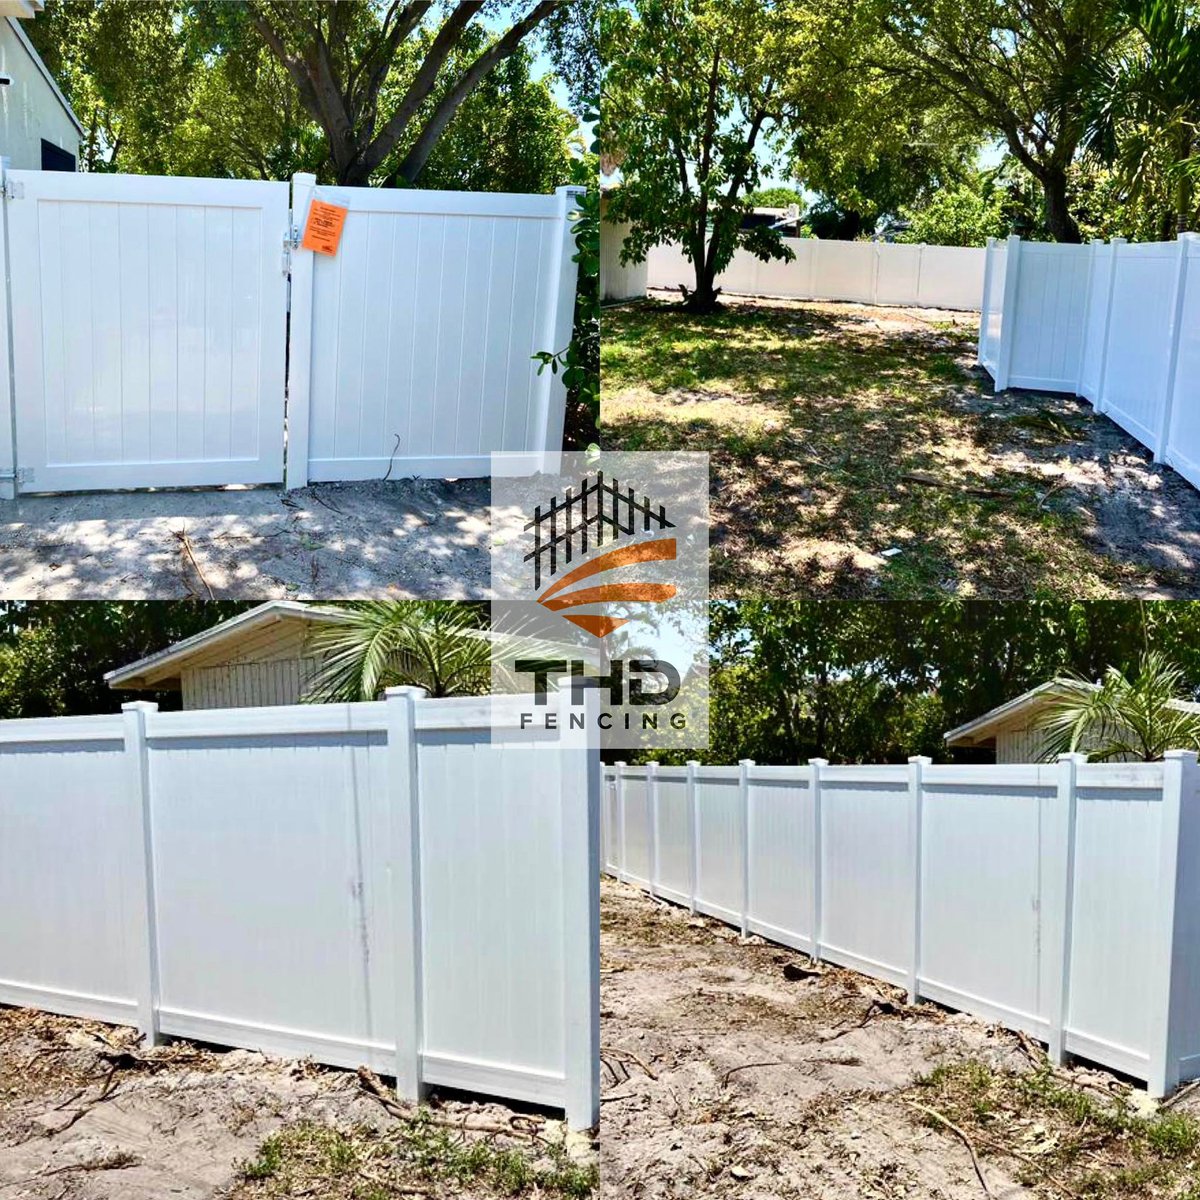 Just got a new 6ft high white PVC fence installed and it's looking fresh! 

Love the clean and modern look it adds to my yard. 

Call Now For Your Free Estimate ✅

📱1-833-HD-FENCE📱

#homeimprovement #fencing #whitepvc #modern #cleanlook